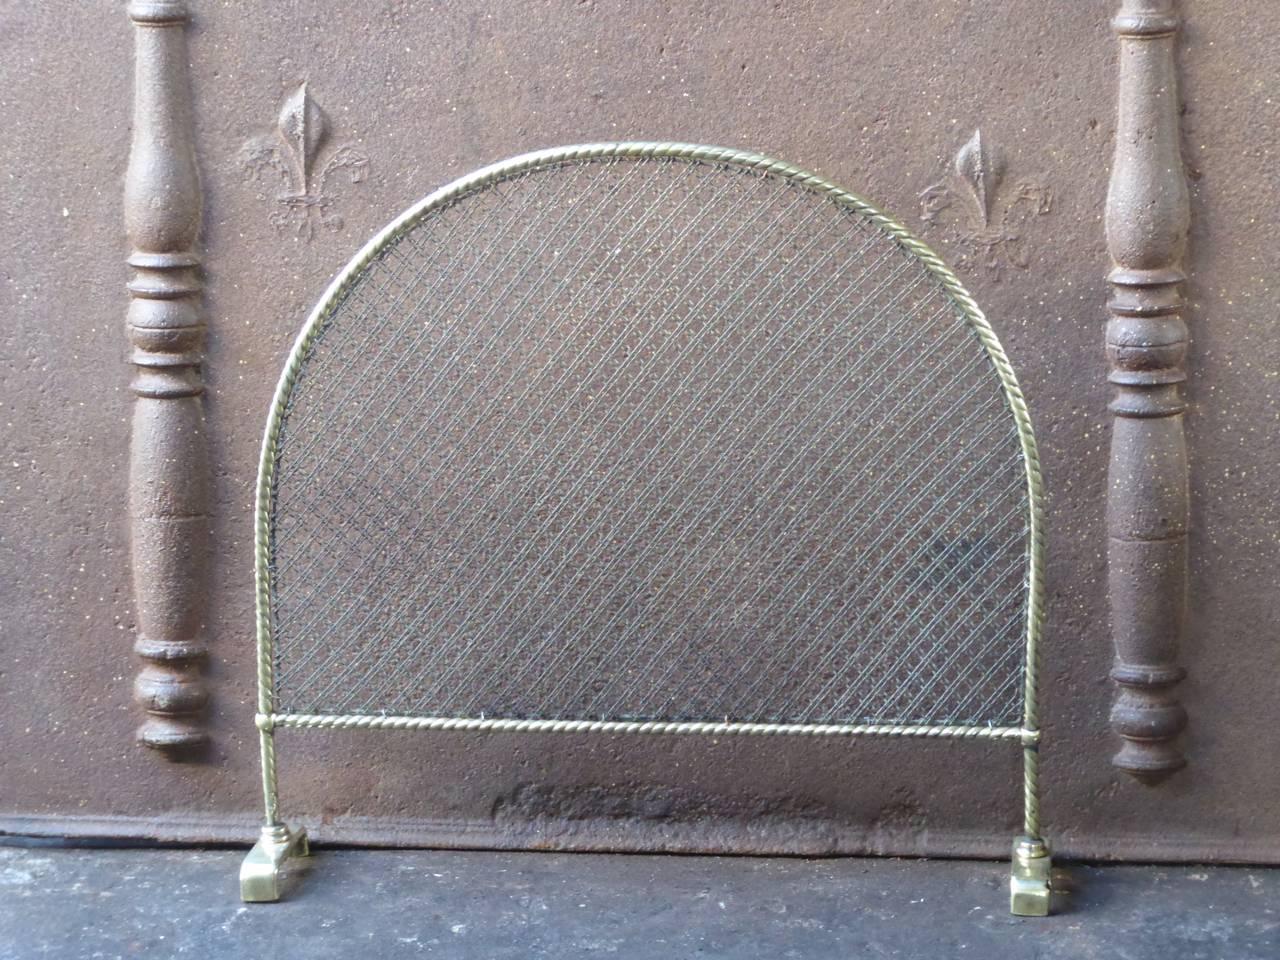 19th century English Victorian firescreen made of polished brass and iron mesh.

We have a unique and specialized collection of antique and used fireplace accessories consisting of more than 1000 listings at 1stdibs. Amongst others, we always have